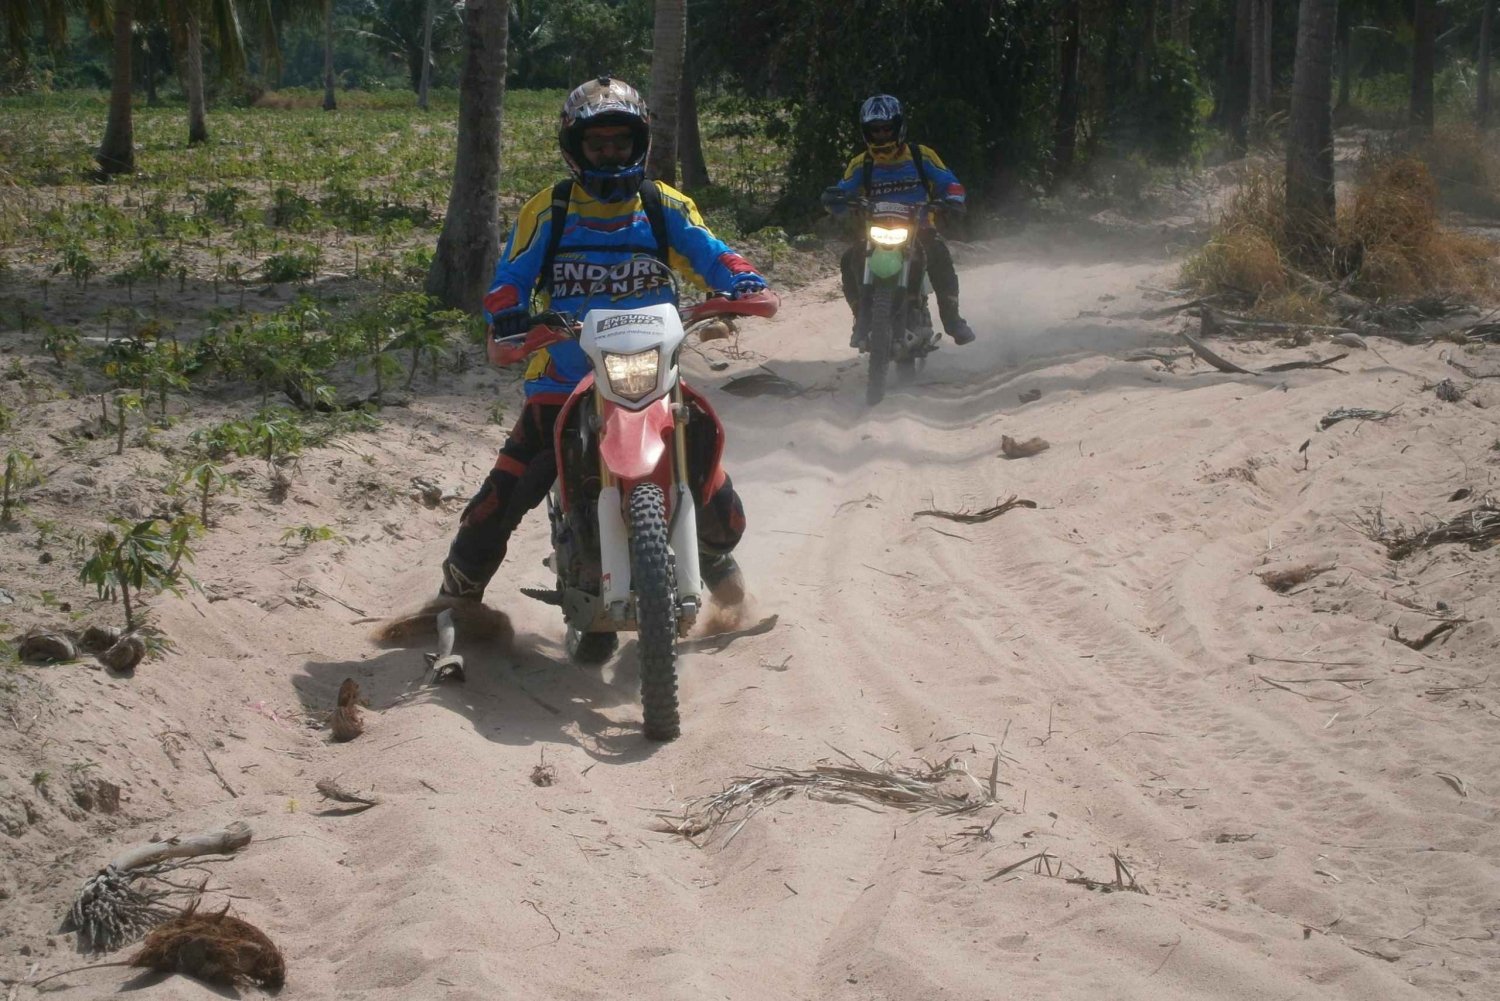 Pattaya: Full-Day Guided Enduro Tour with Meal